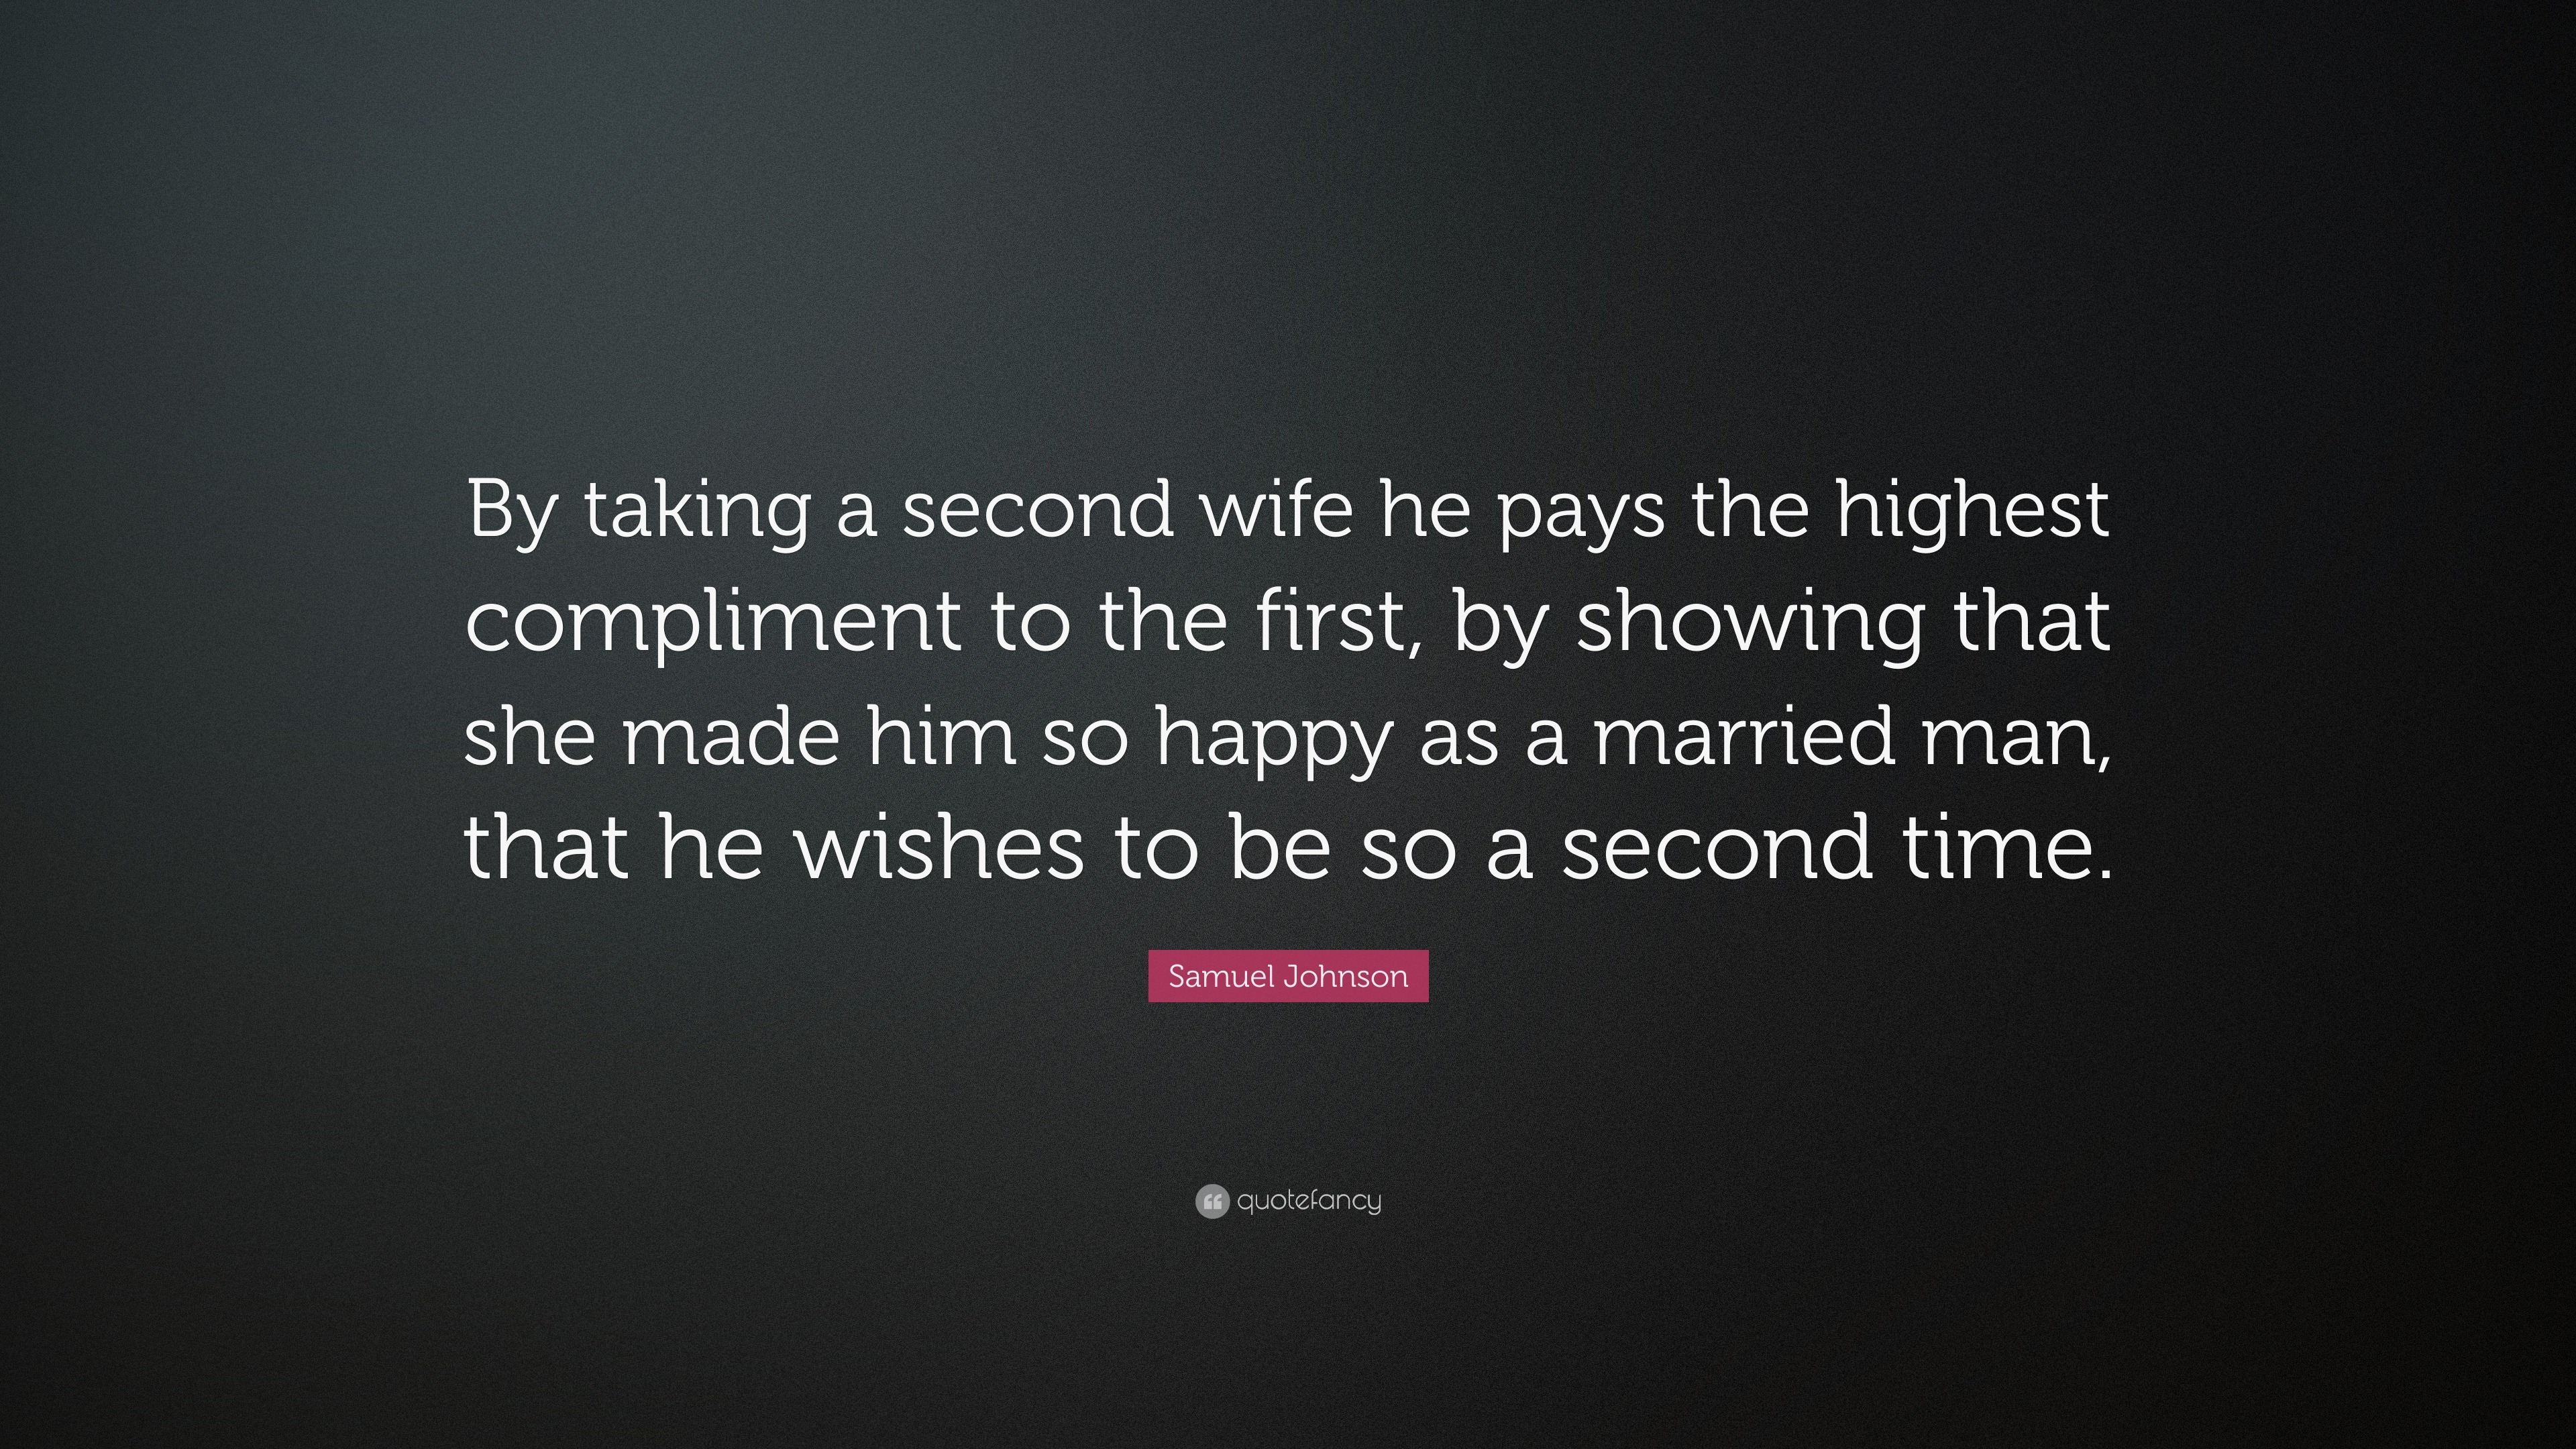 Being the second wife